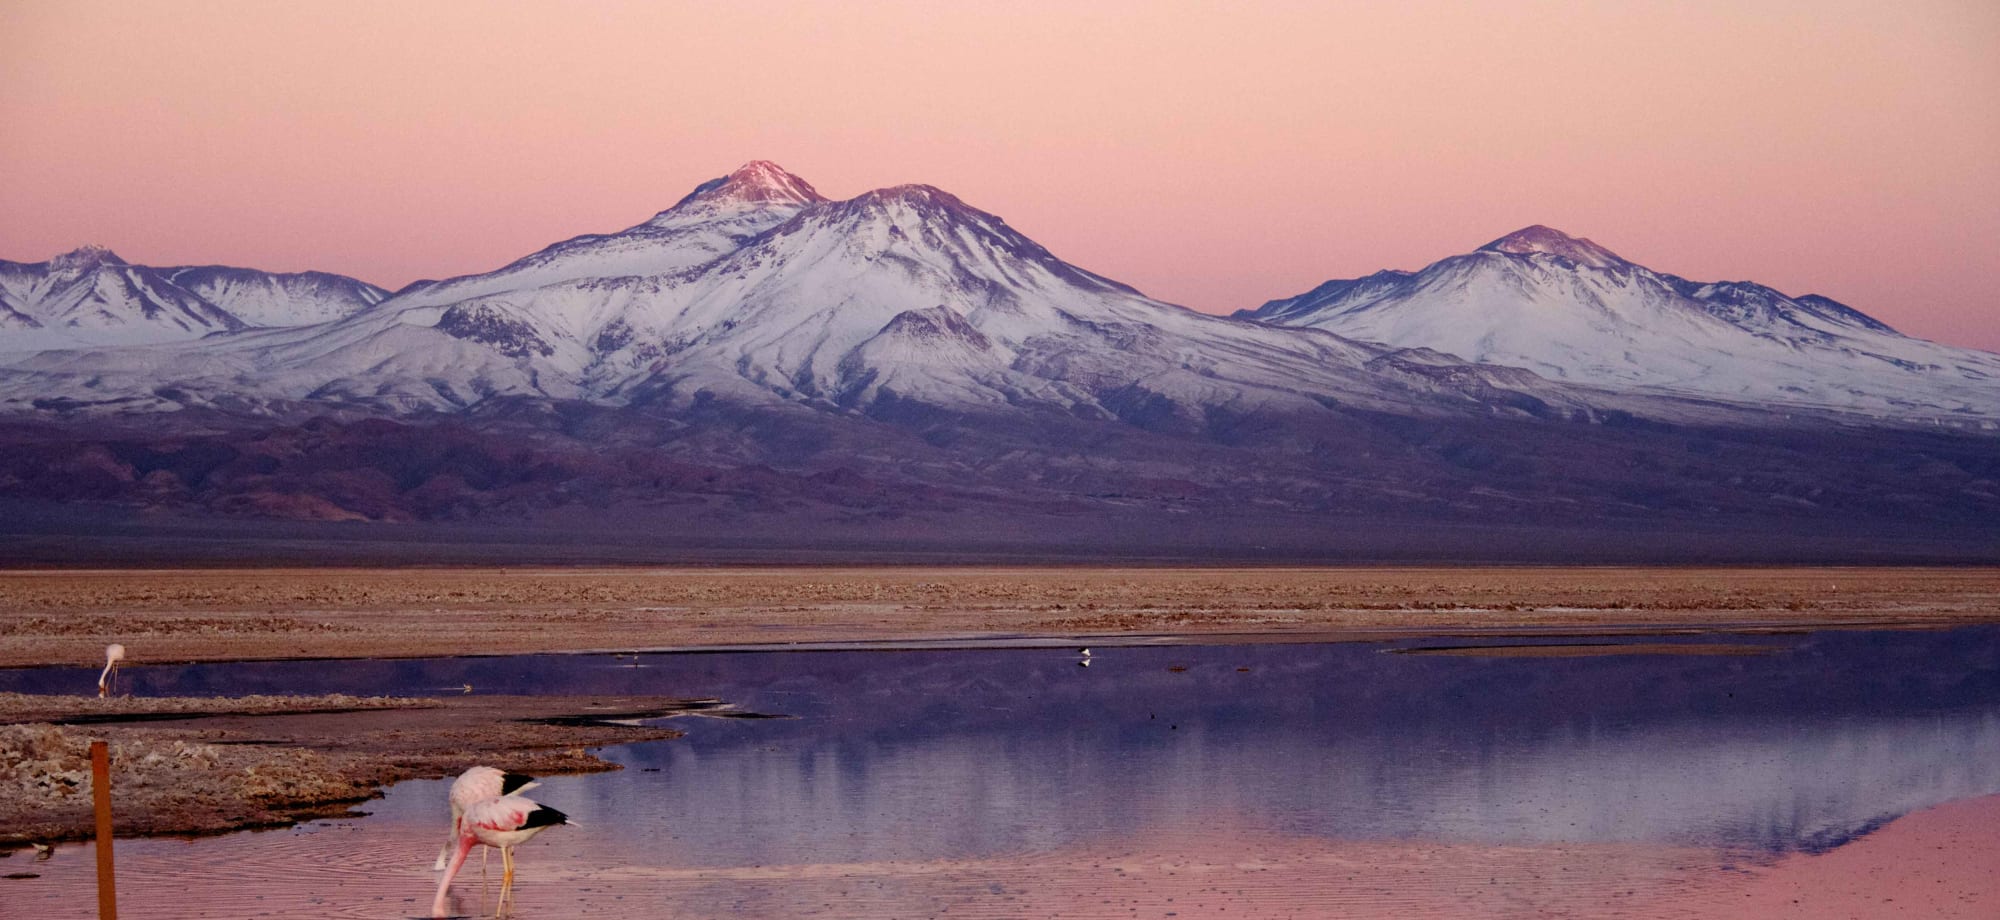 Snow-capped mountains are reflected into a lake, along with orange and pink hues from the sunset.